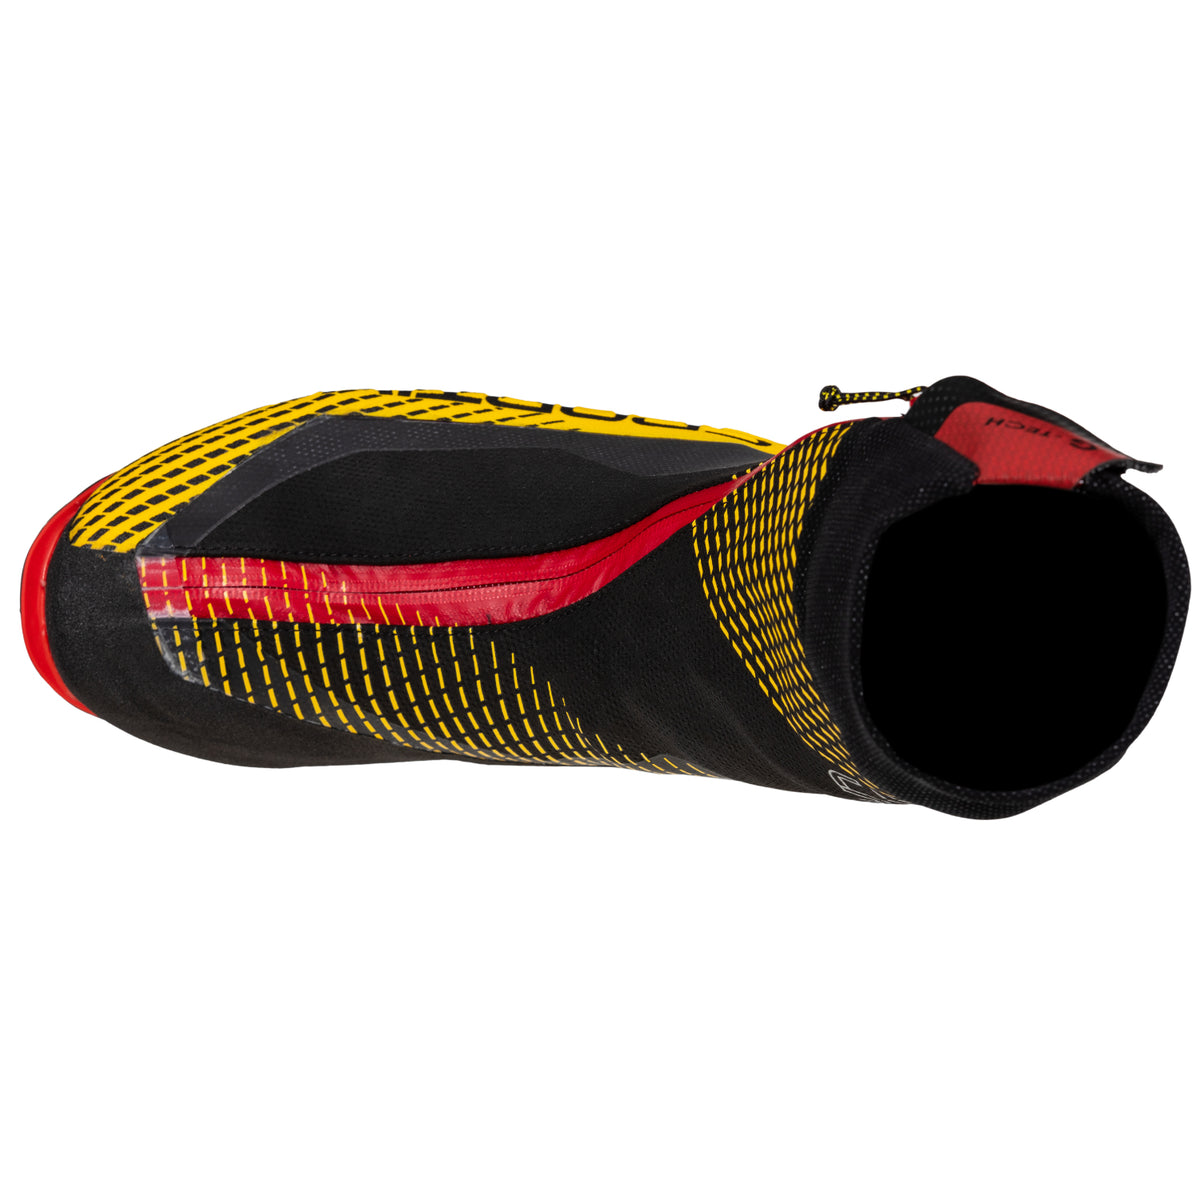 La Sportiva G-Tech mountaineering boots in black red and yellow, from above